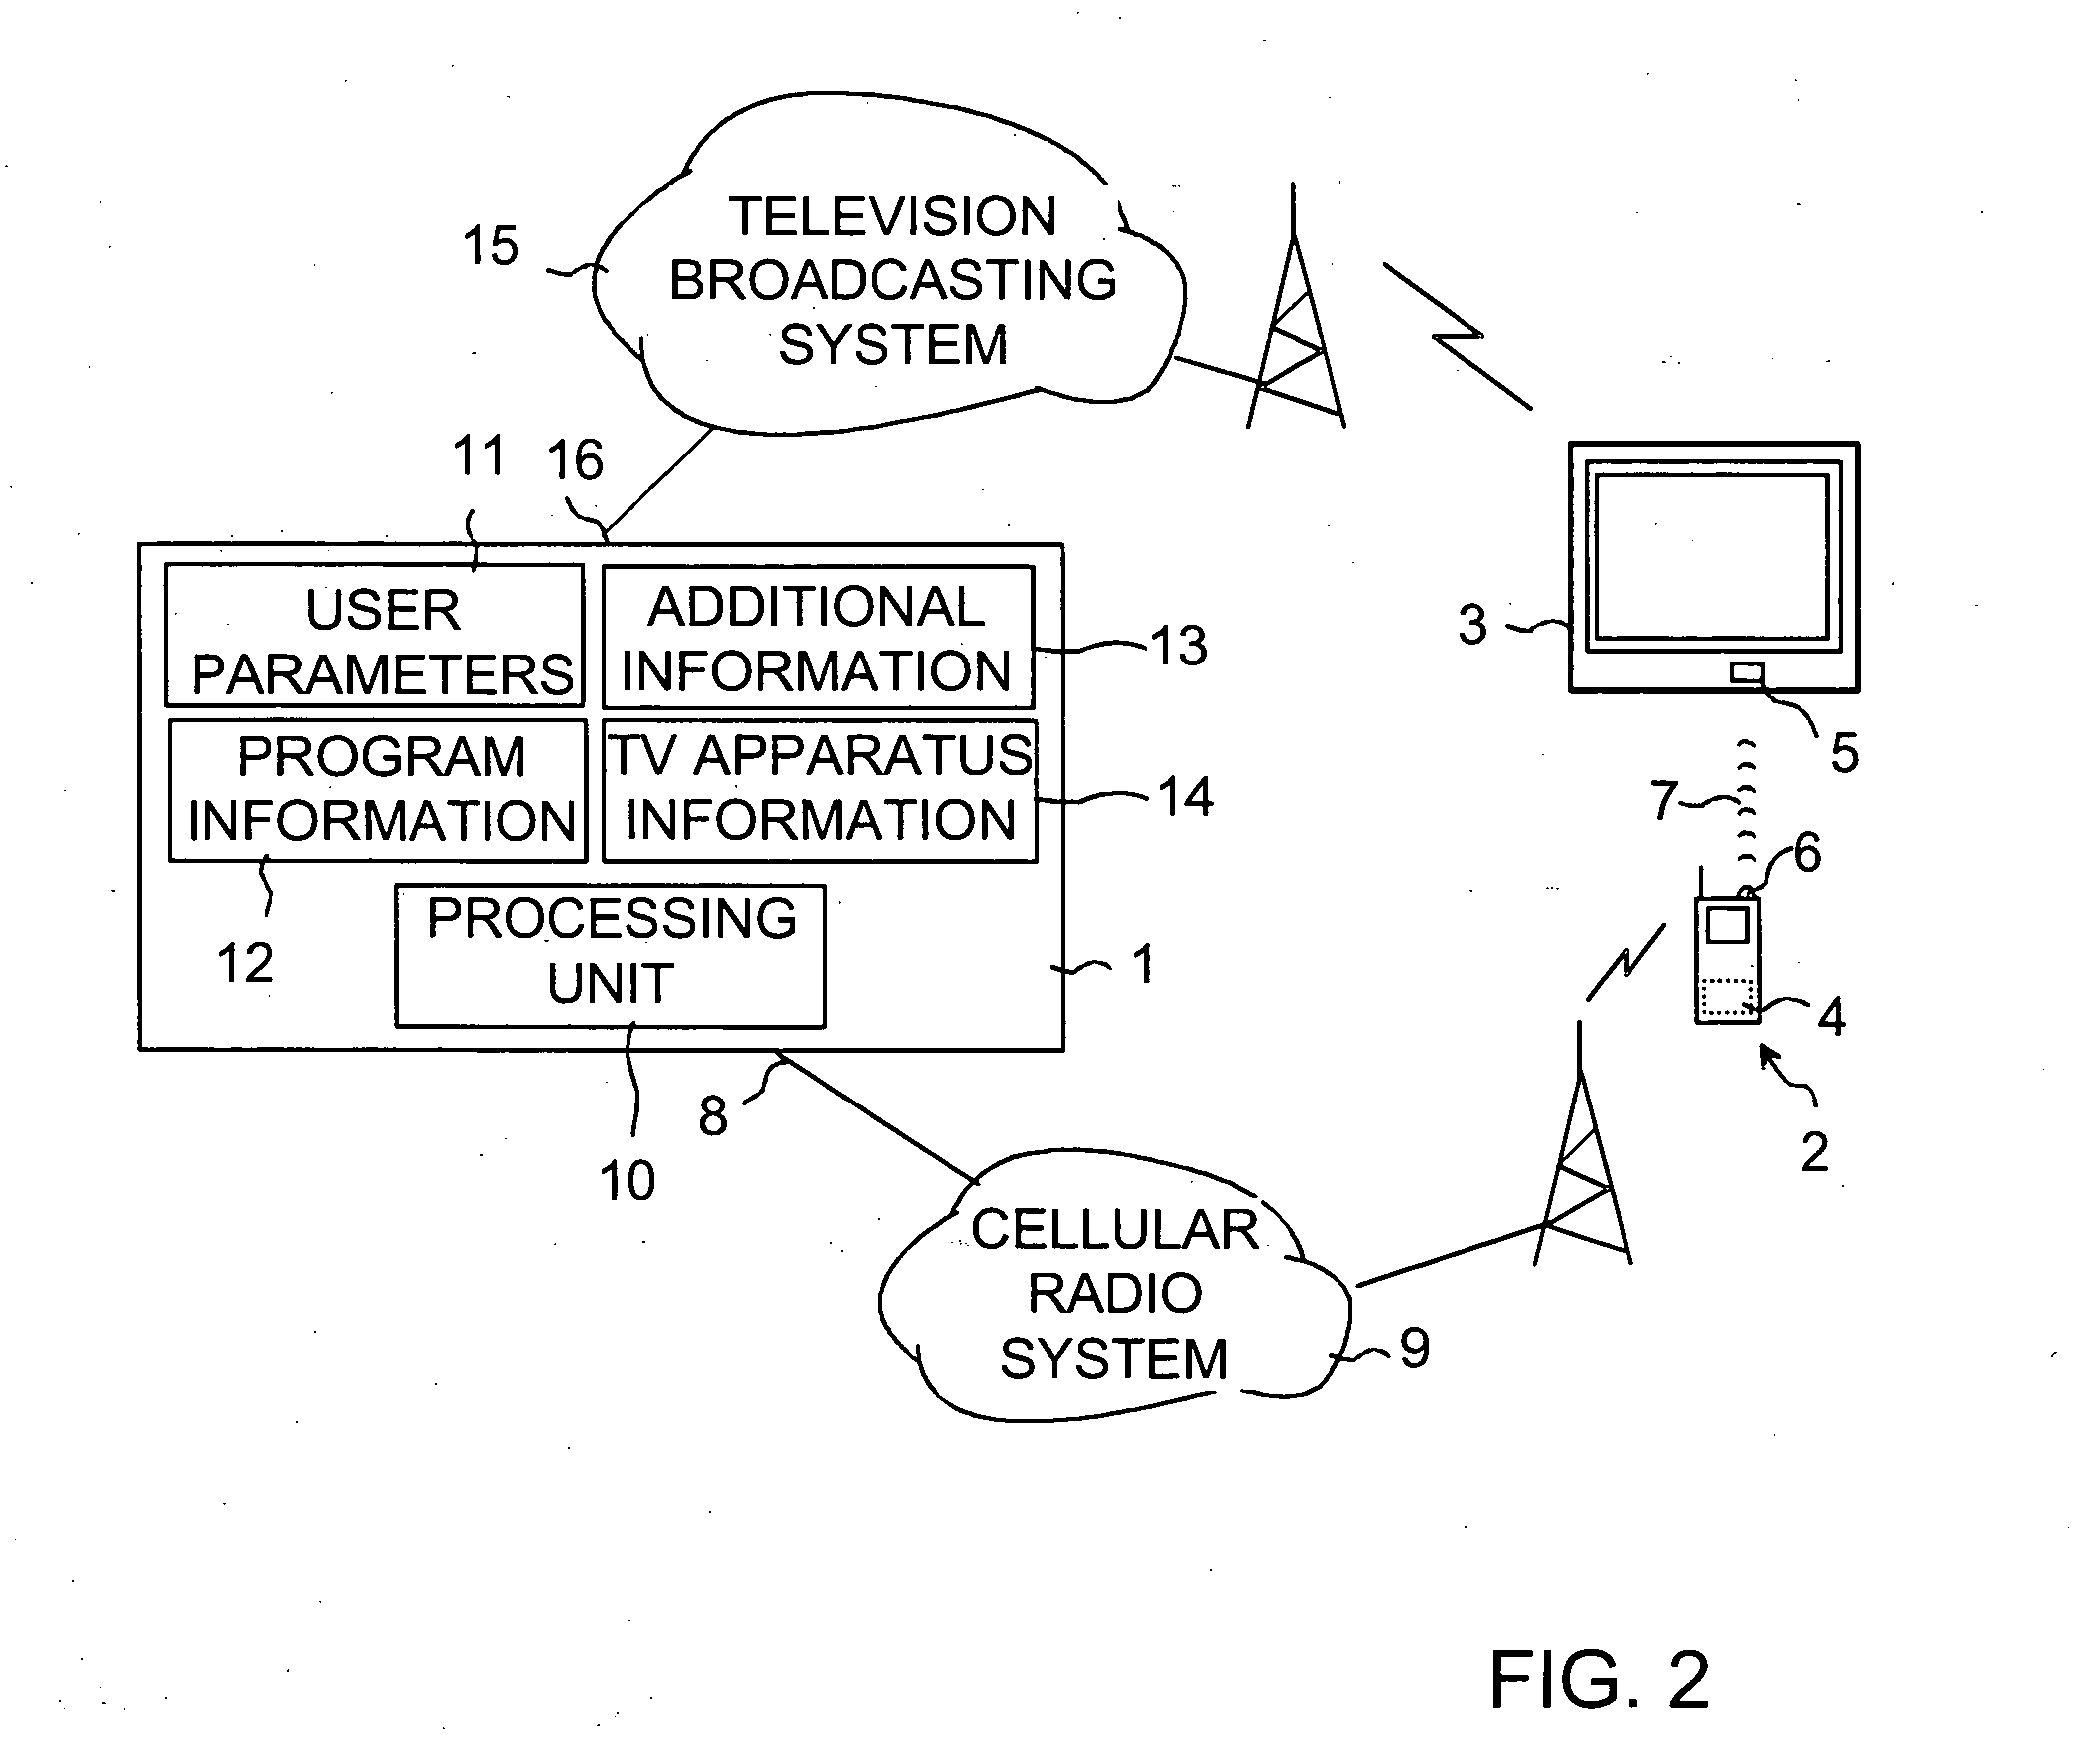 Method of controlling a TV apparatus